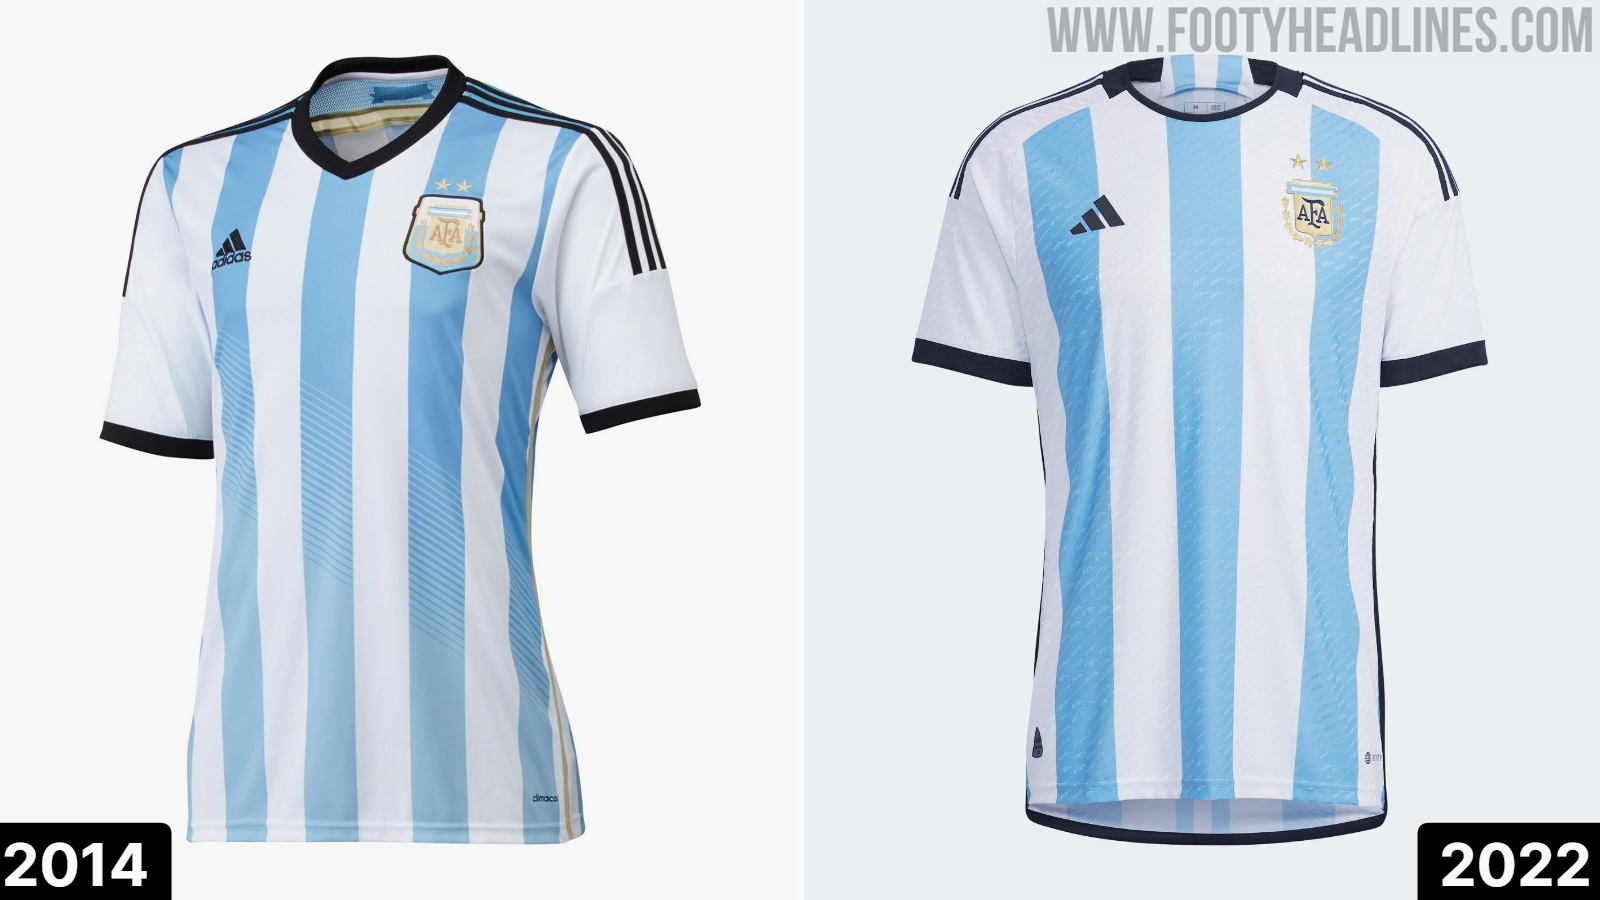 Argentina 2022 World Cup Home Kit Released - Footy Headlines